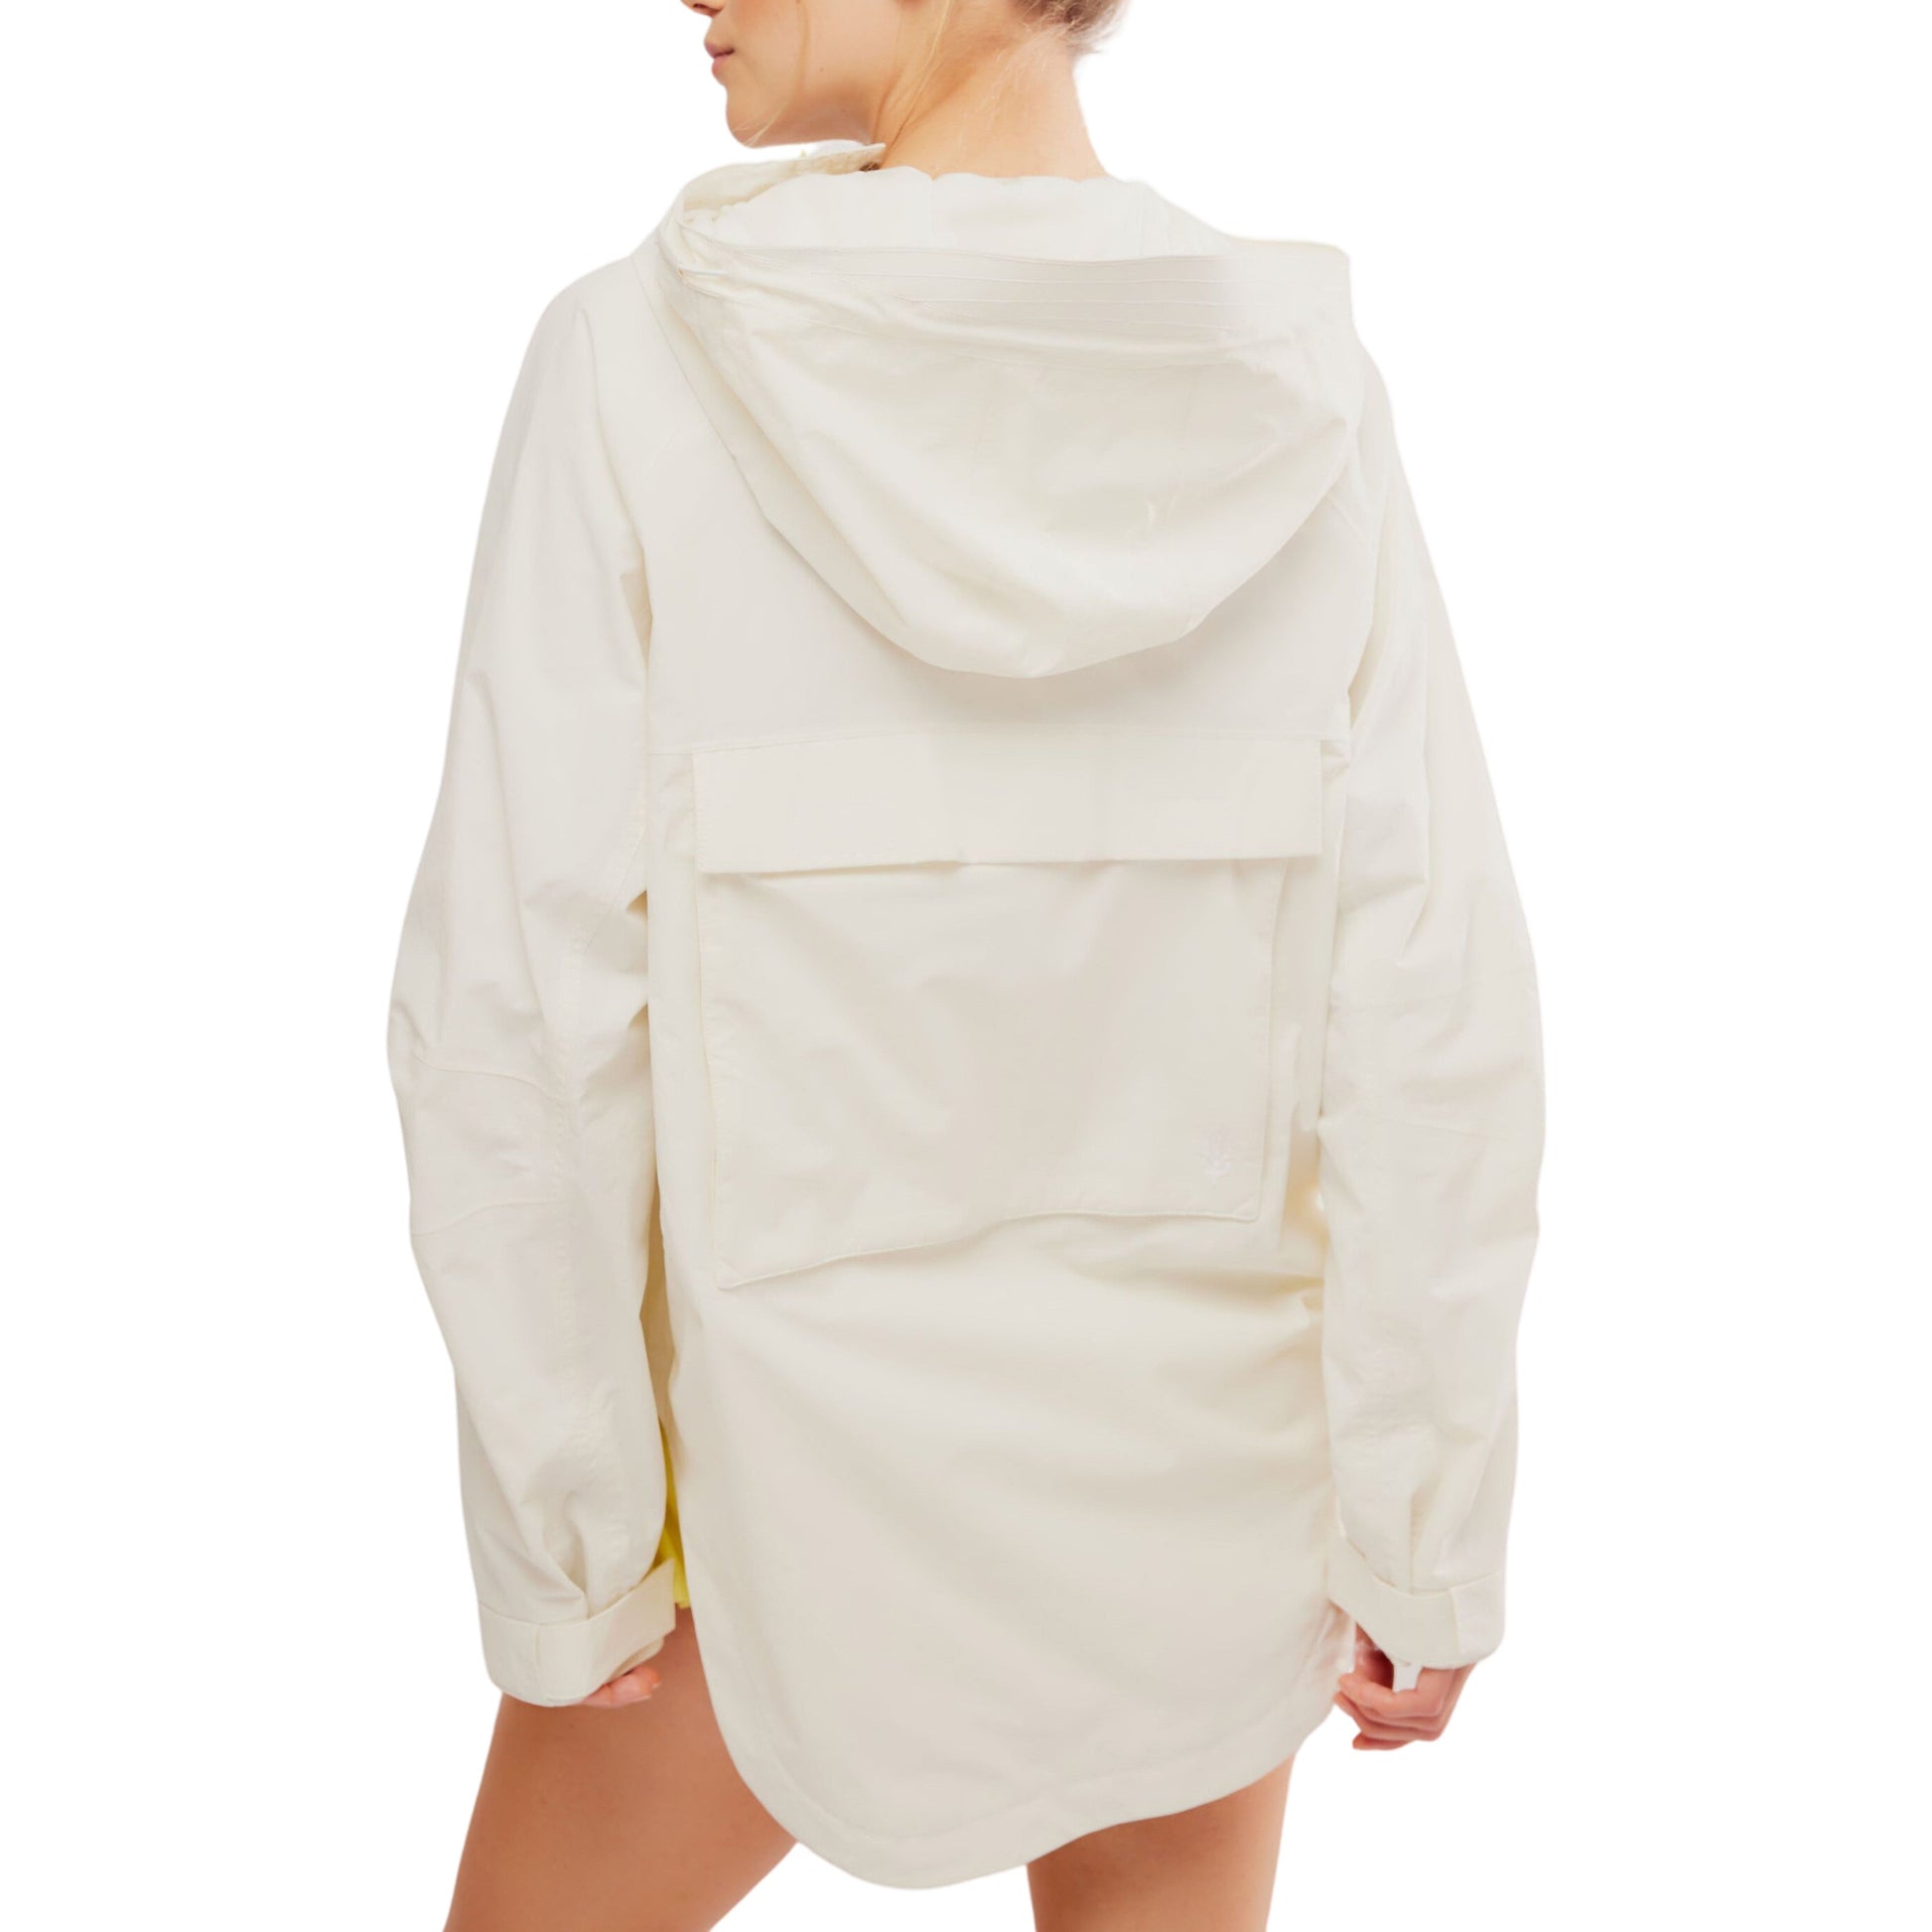 Rear view of a woman wearing a Singin in the Rain Jacket by Free People Movement, featuring a large pocket on the back.